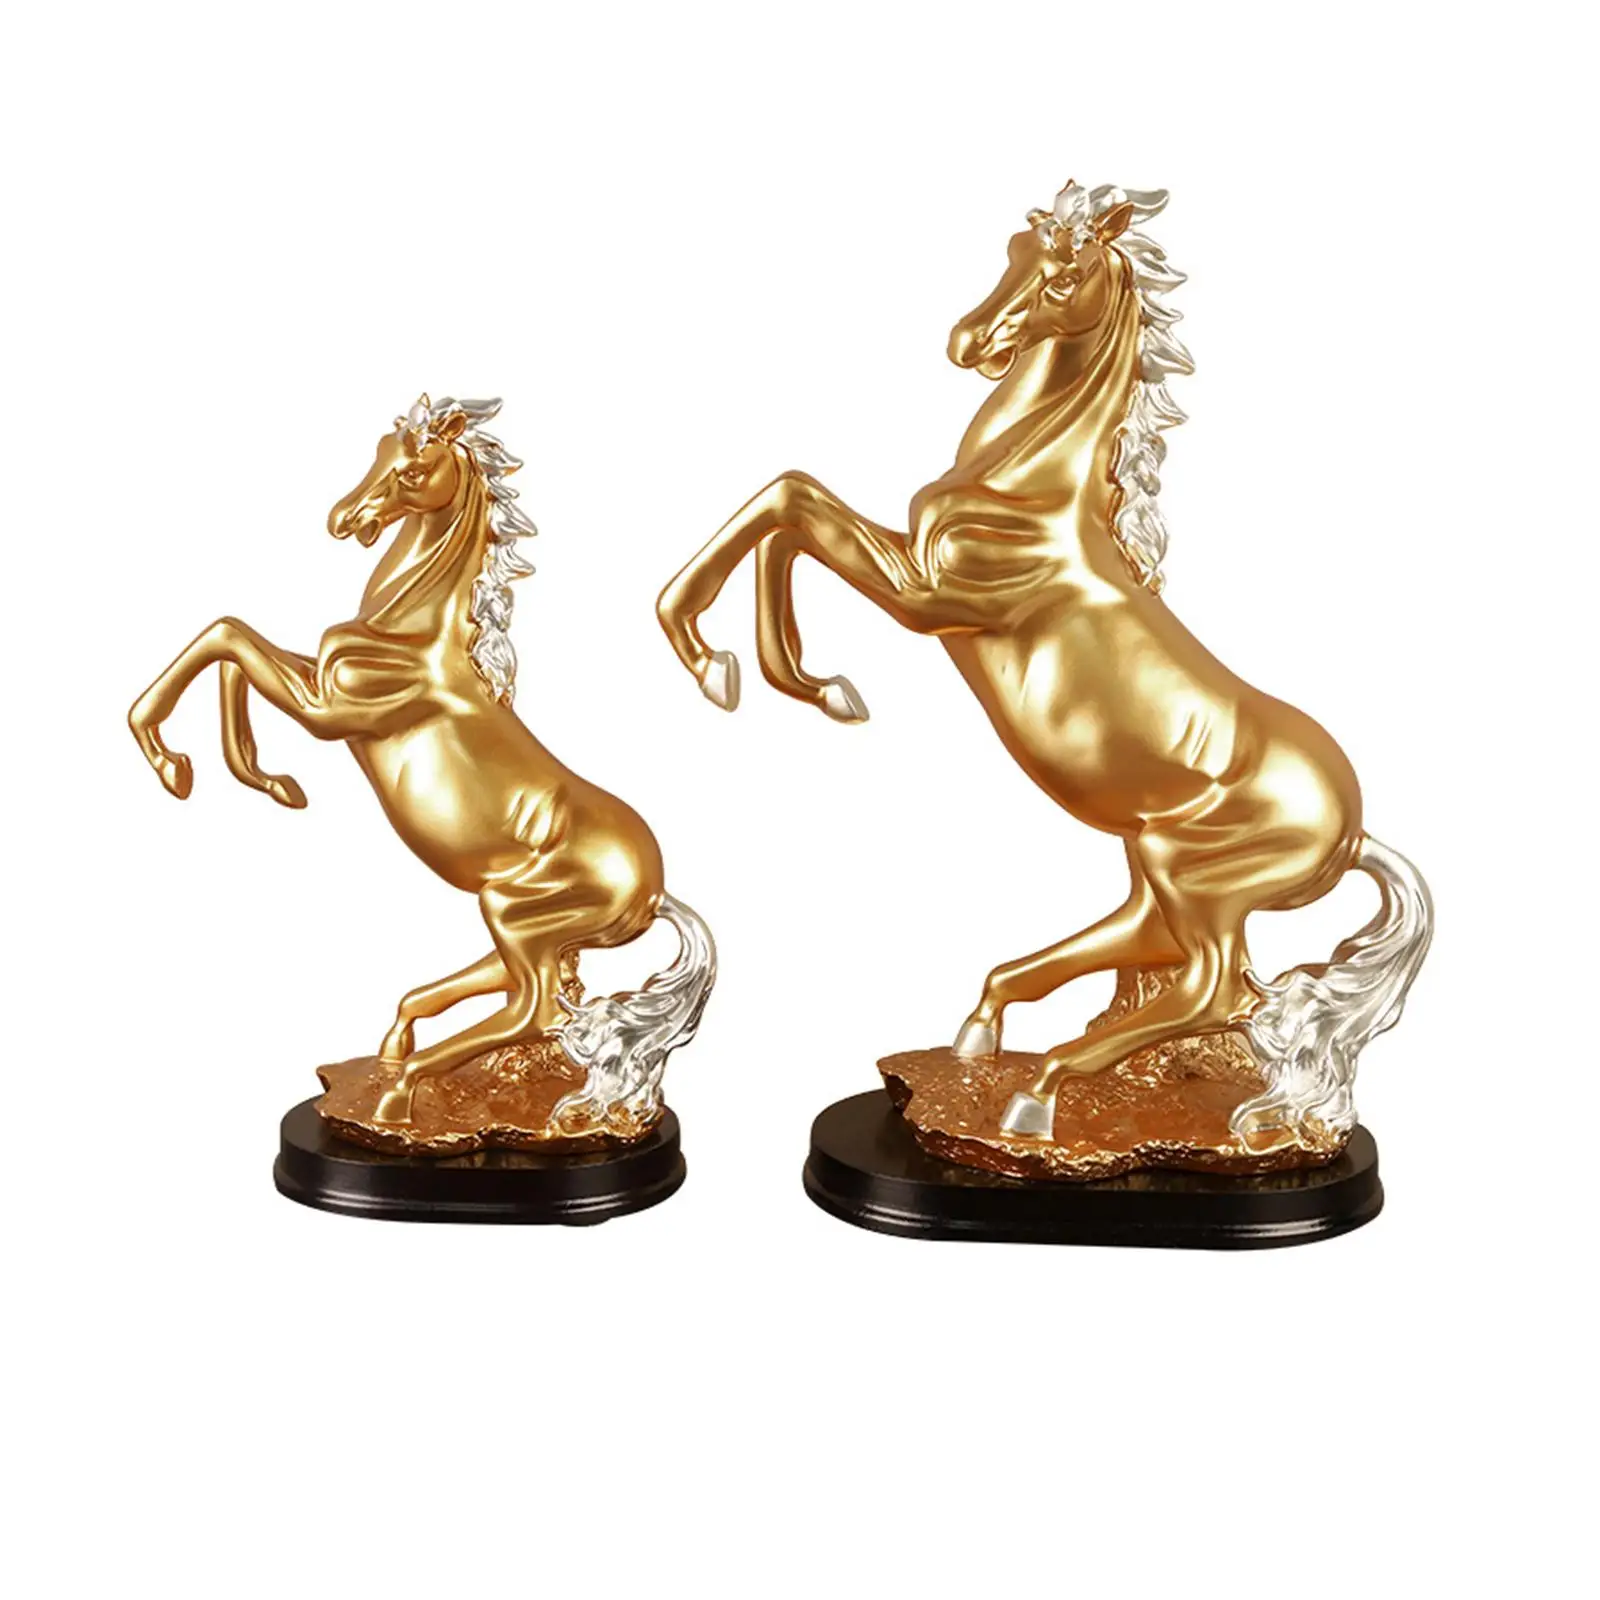 

Galloping Resin Figurines Sculptures Decorating Art Works Collectible Horse Statues for Home Wedding Living Room Stand Sill